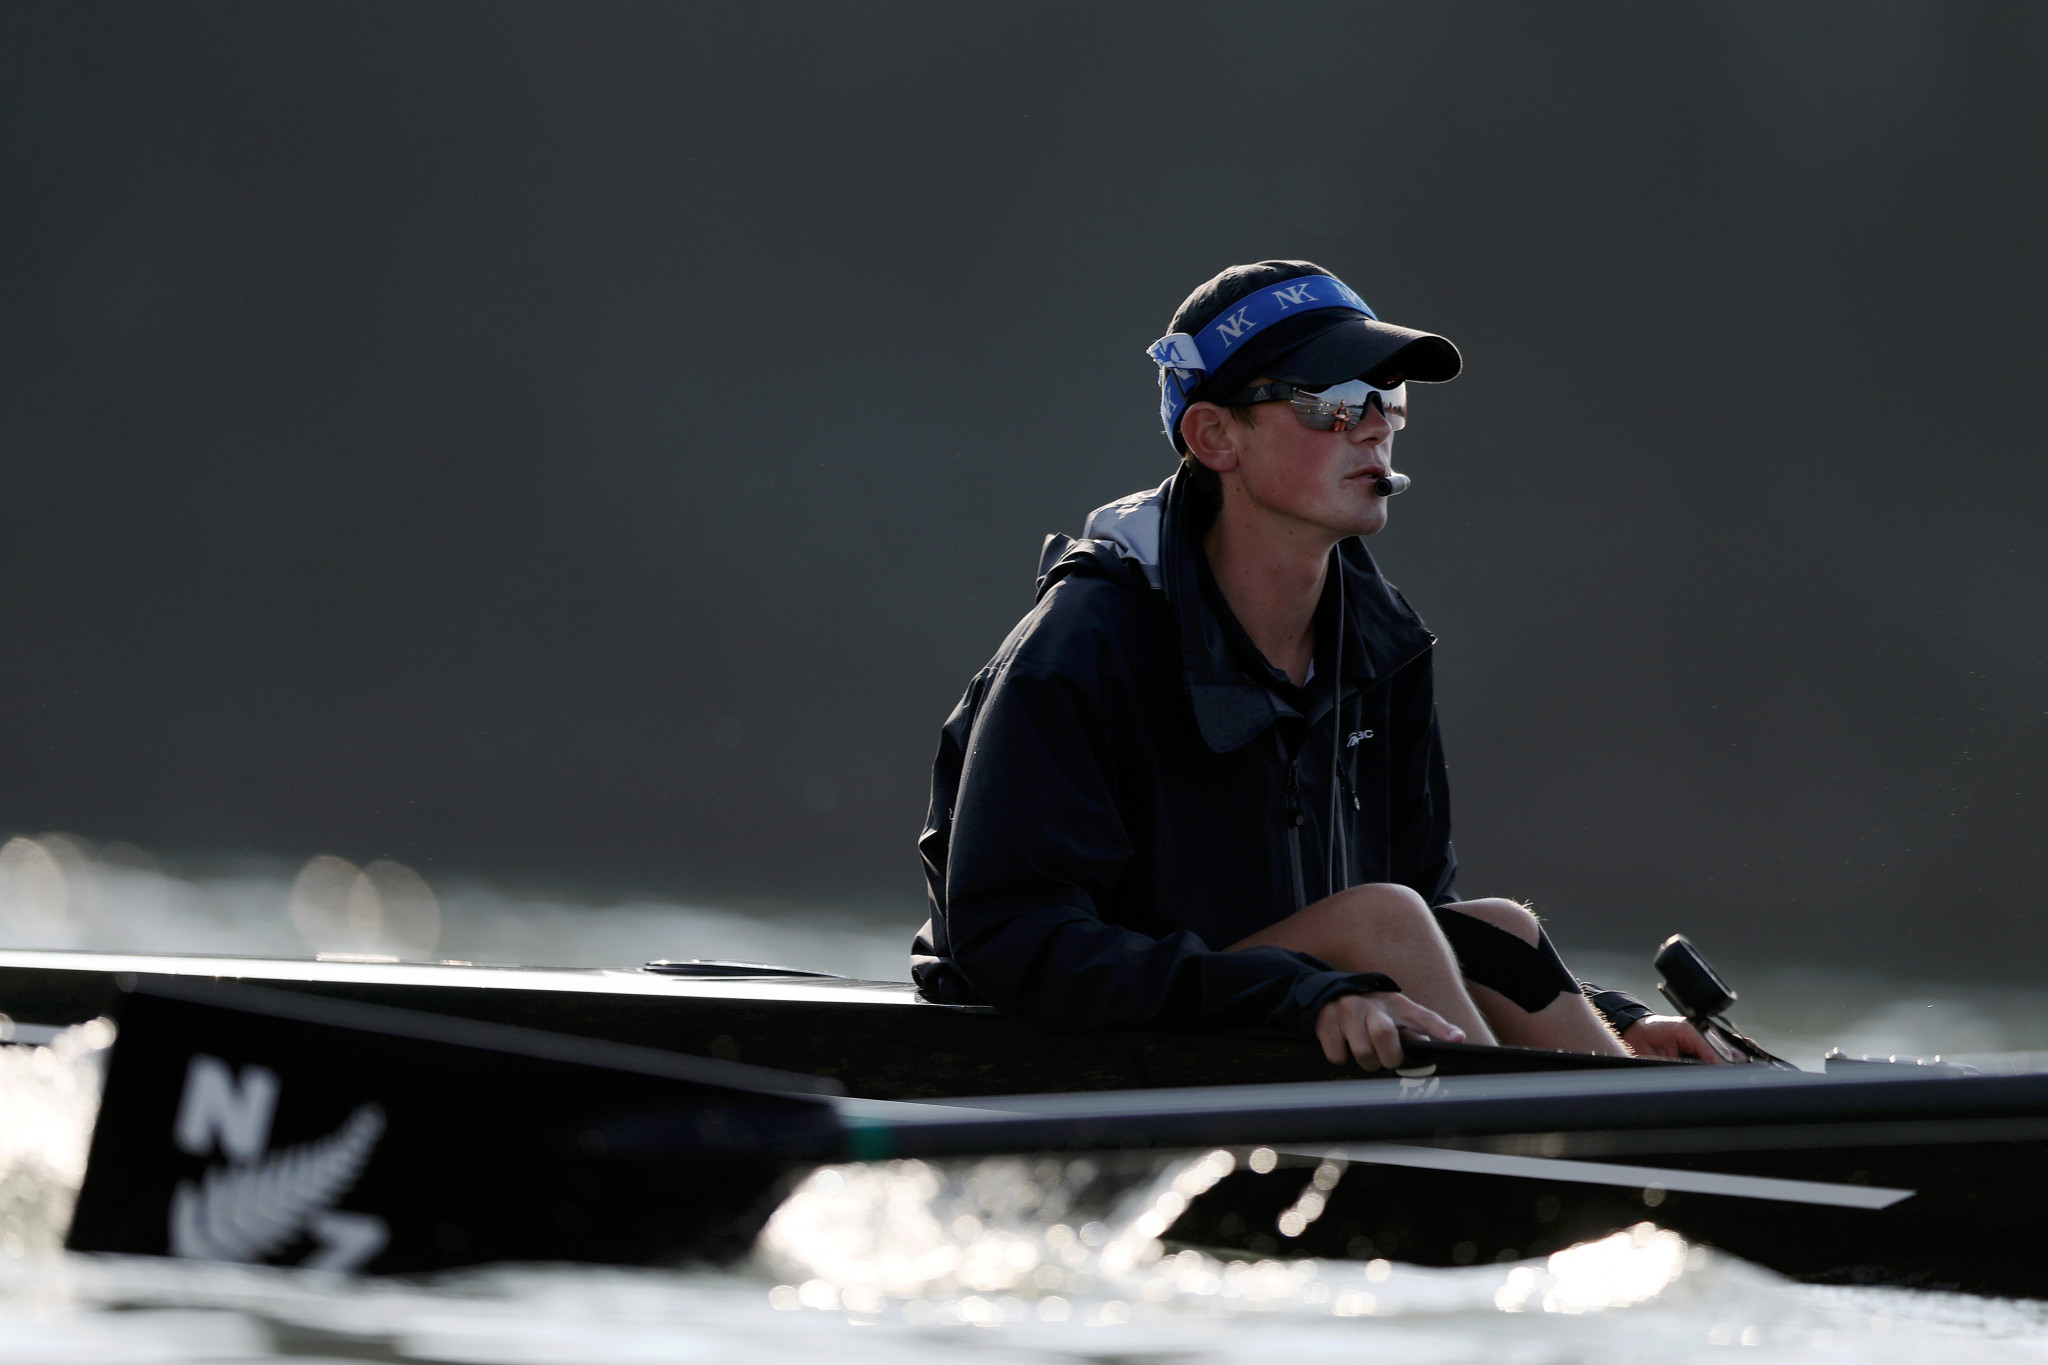 Tokyo 2020 gold medallist Bosworth retires from rowing